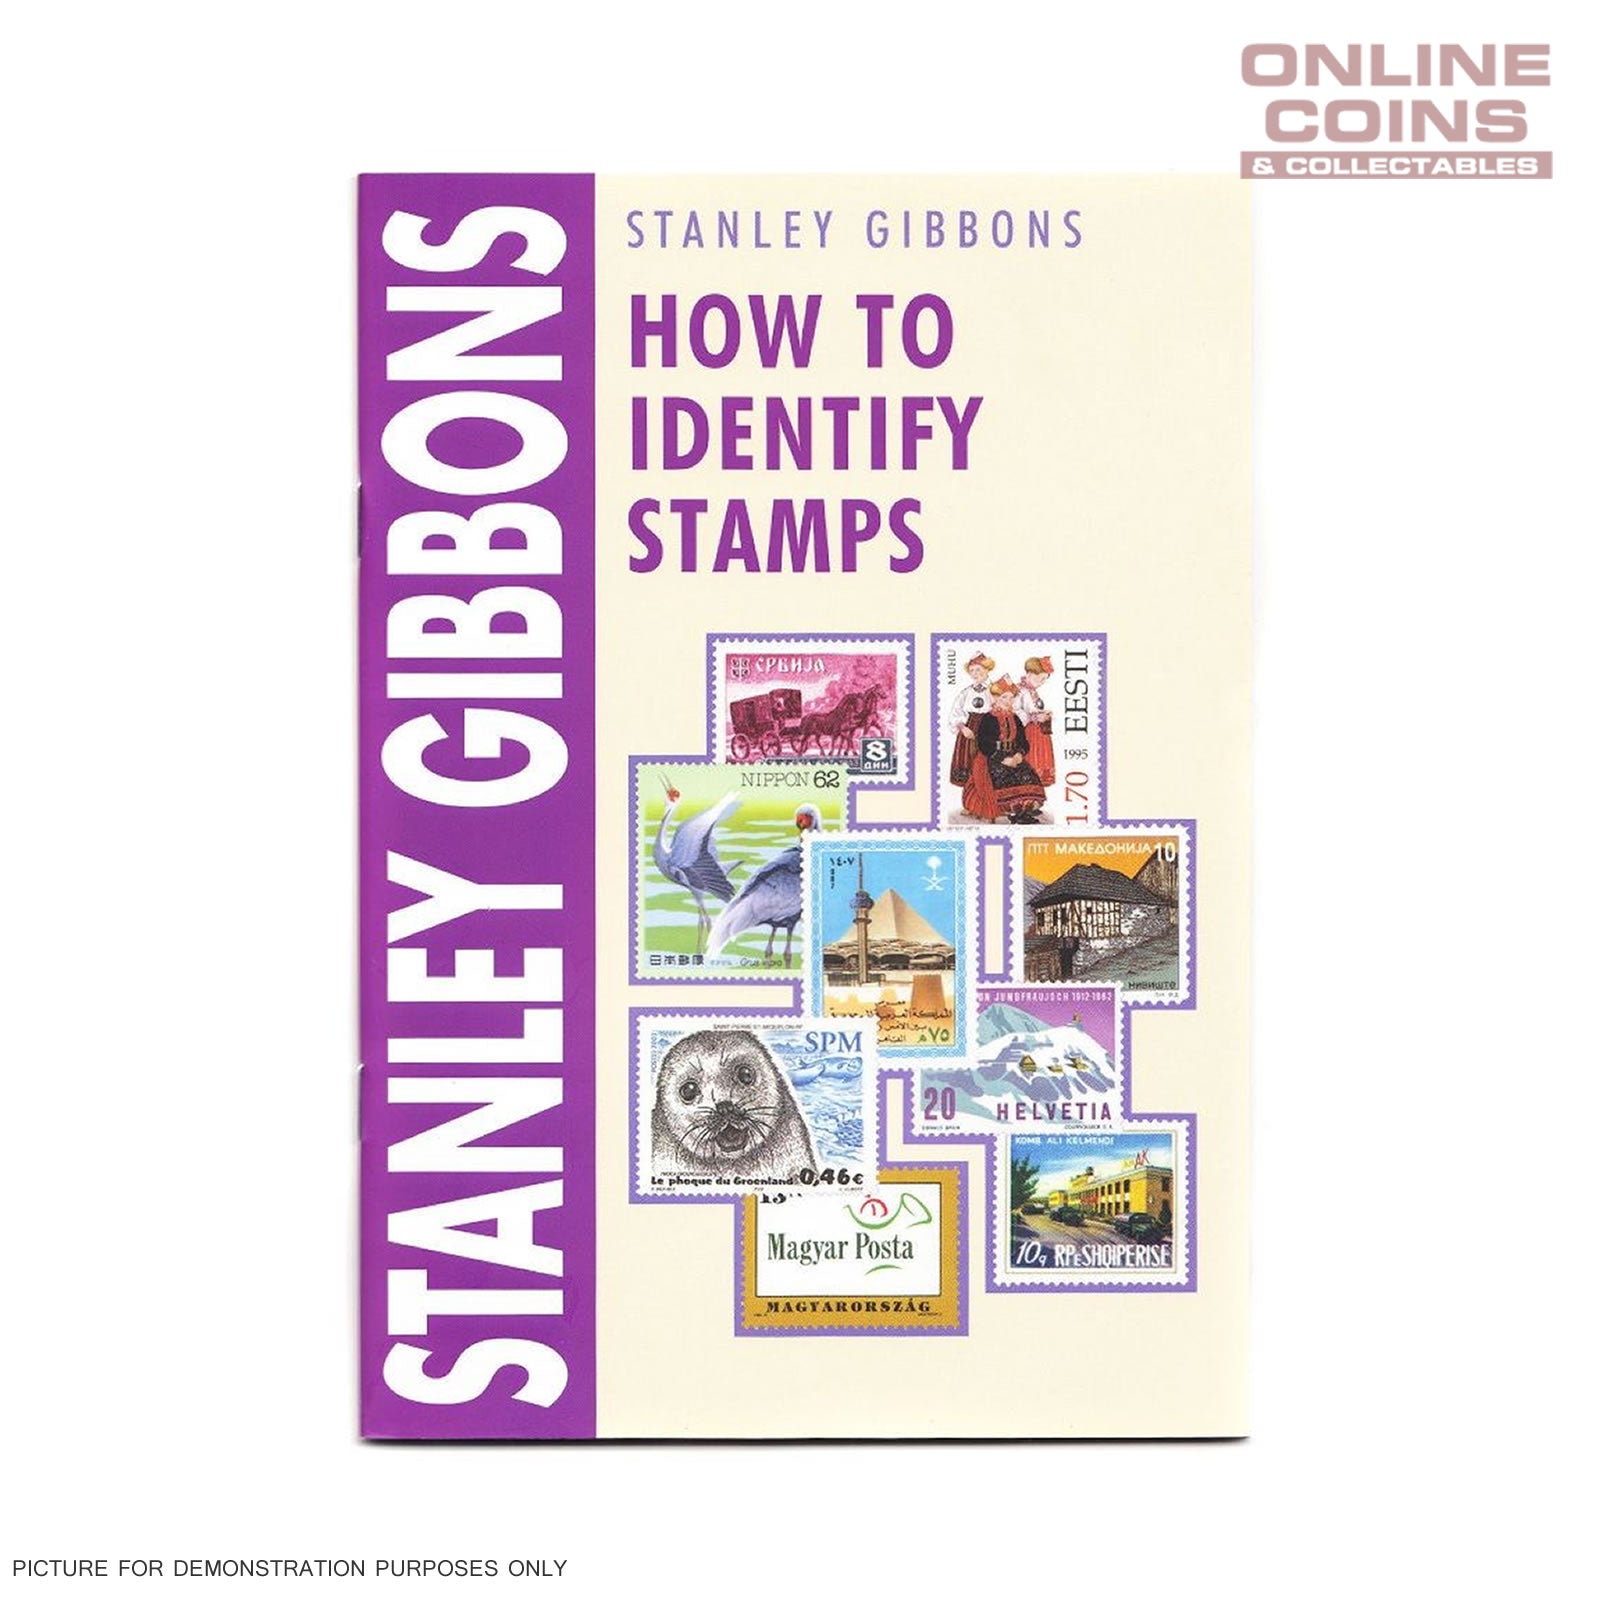 Stanley Gibbons How to Identify Stamps Paperback Book - Great for new Collectors